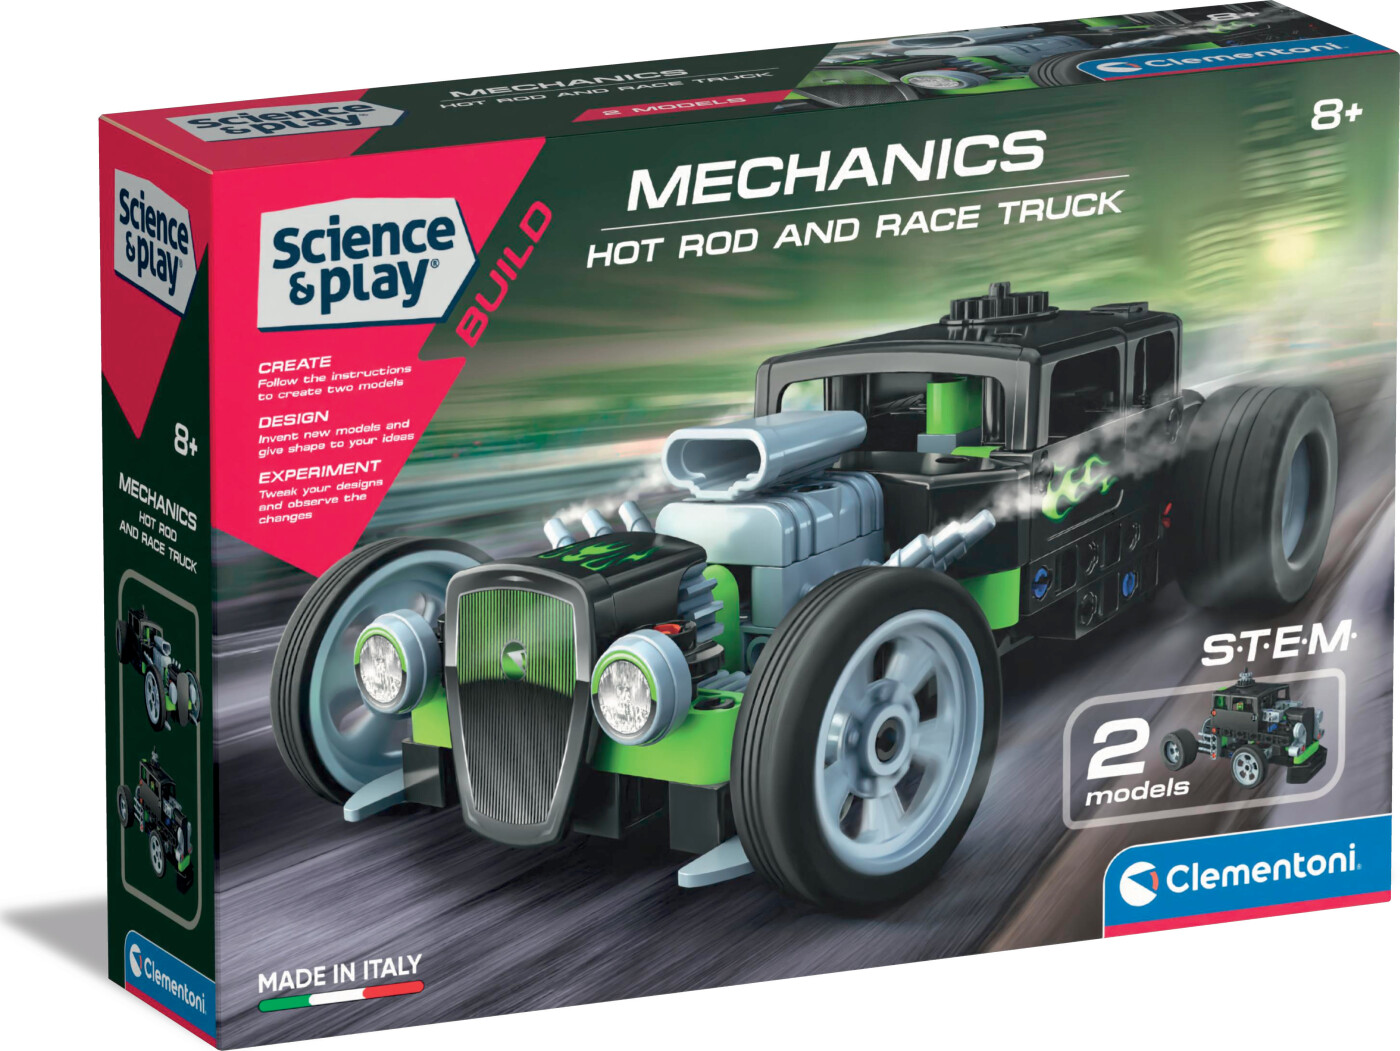 Billede af Clementoni - Science And Play Build - Mechanics - Hot Rod And Race Truck